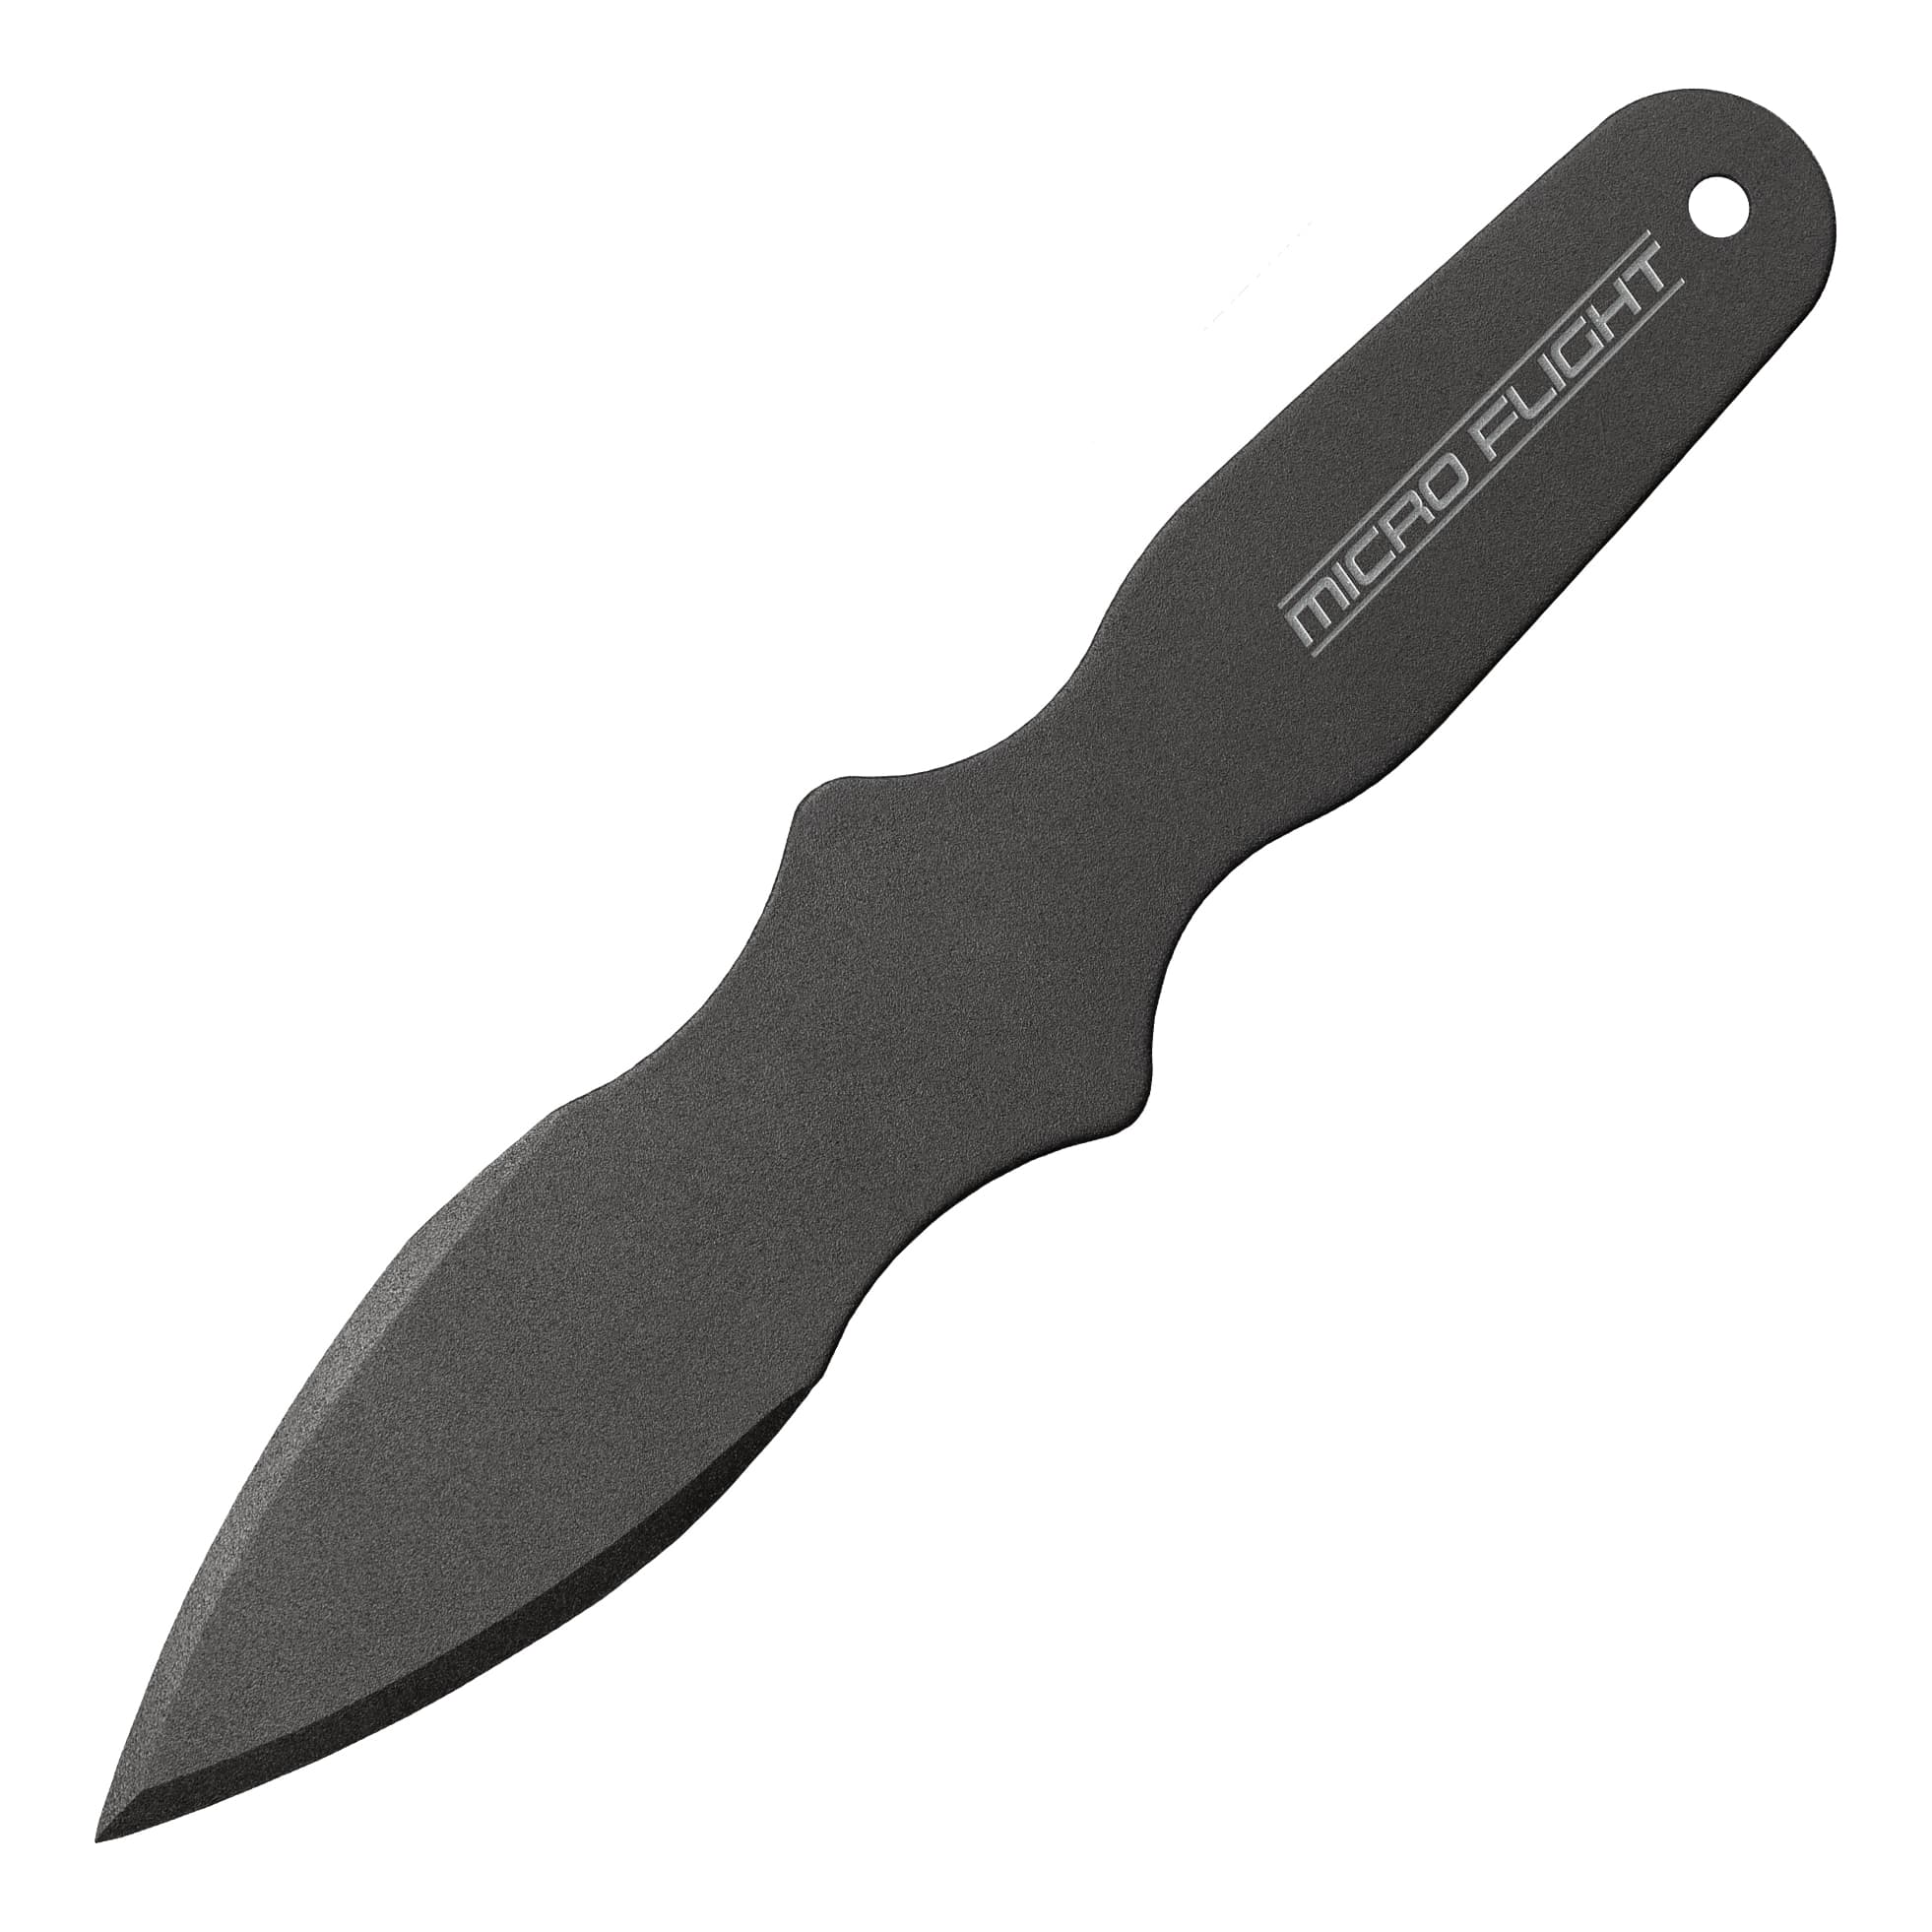 Cold Steel Micro Flight Throwing Knife